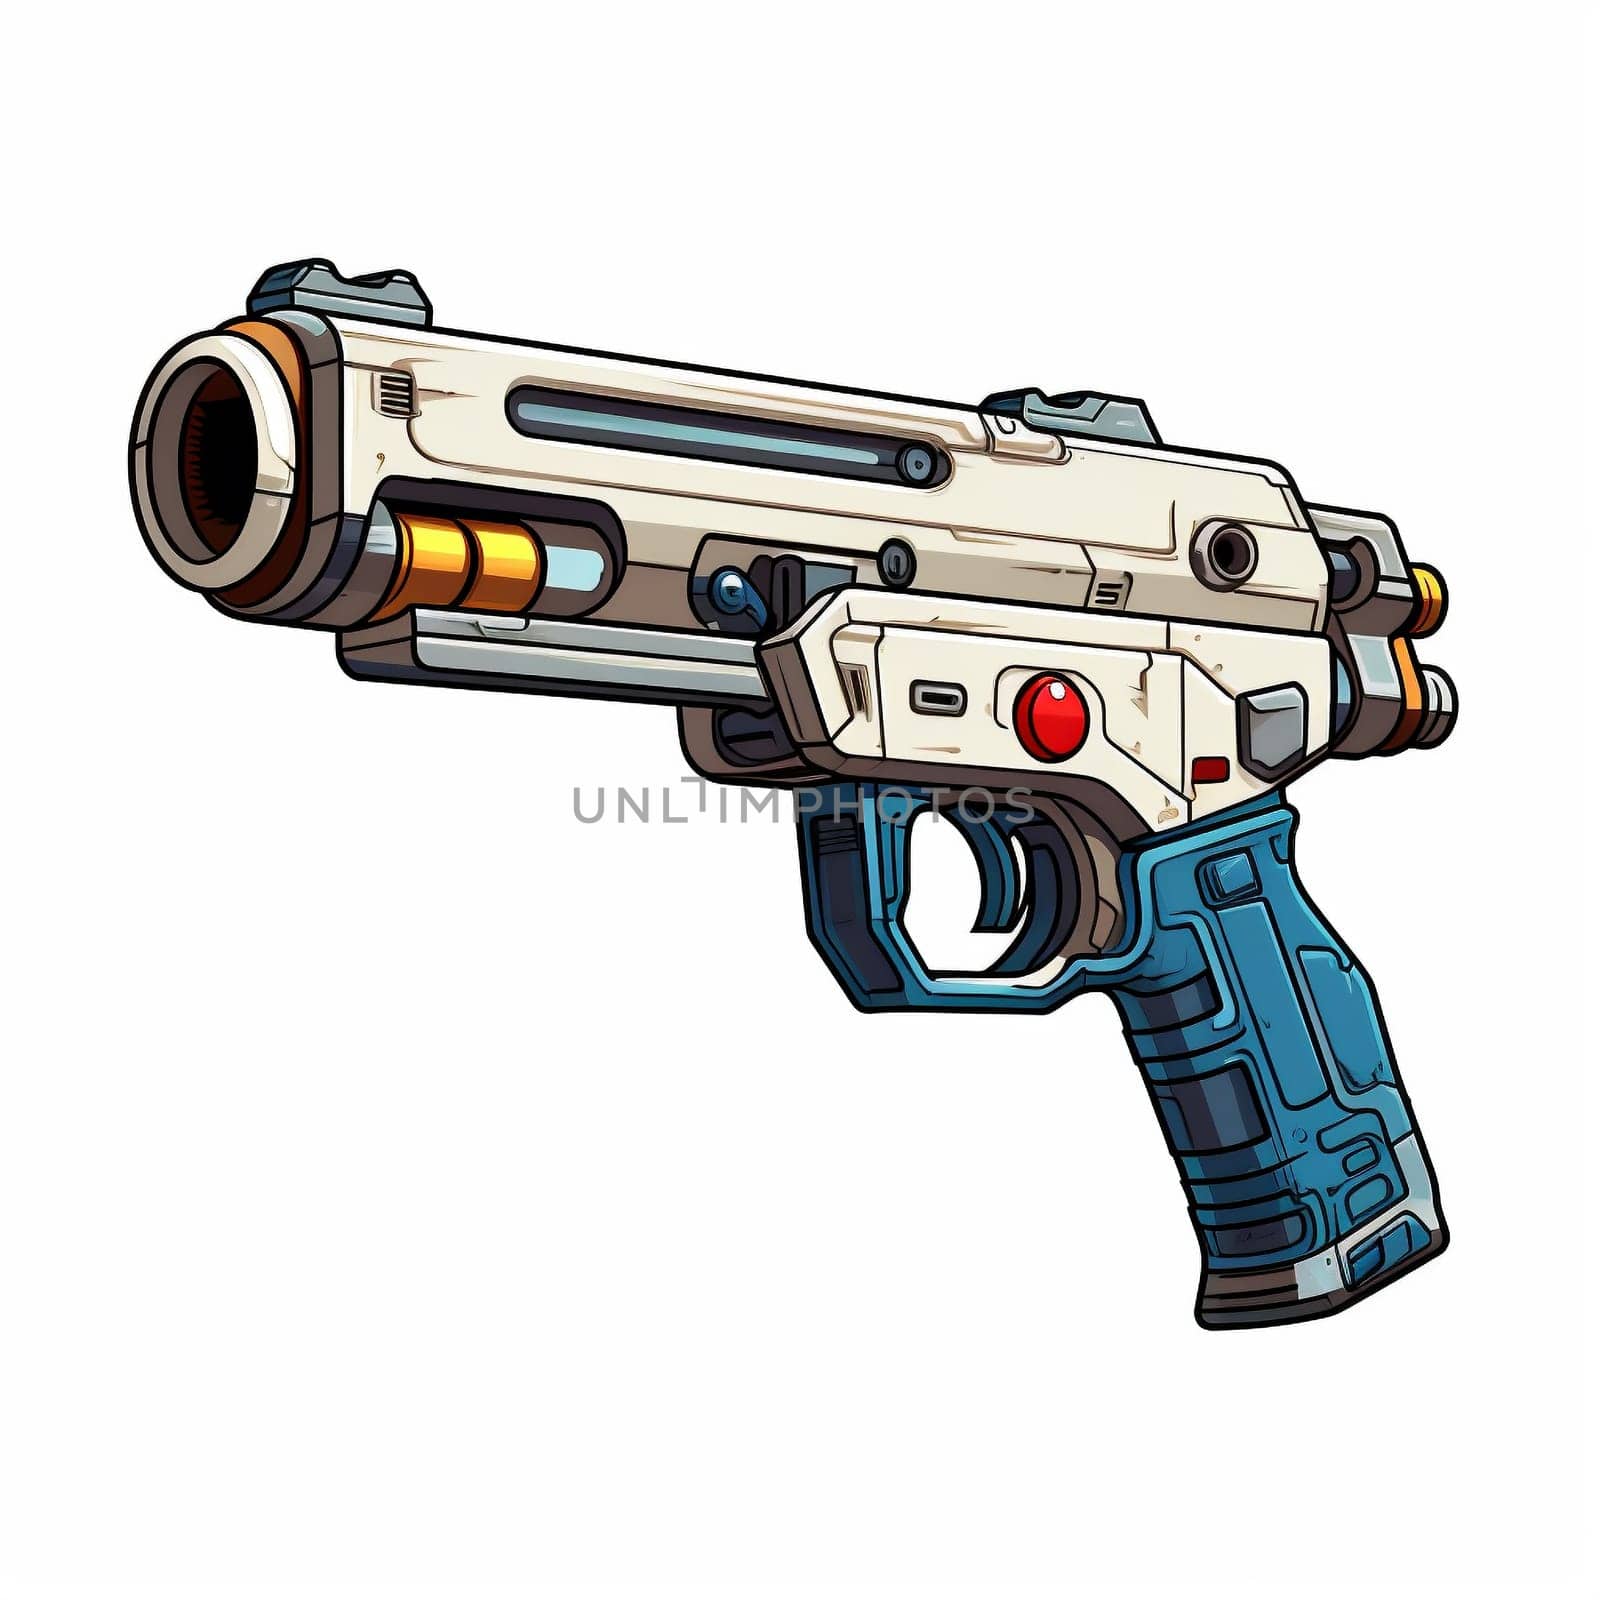 Illustration of Sci-Fi Futuristic Weapon Isolated on White Background. Science Fiction Military Laser Gun. Concept Design of High-Tech Assault Rifle with Blue and White Color Metal. Side View.